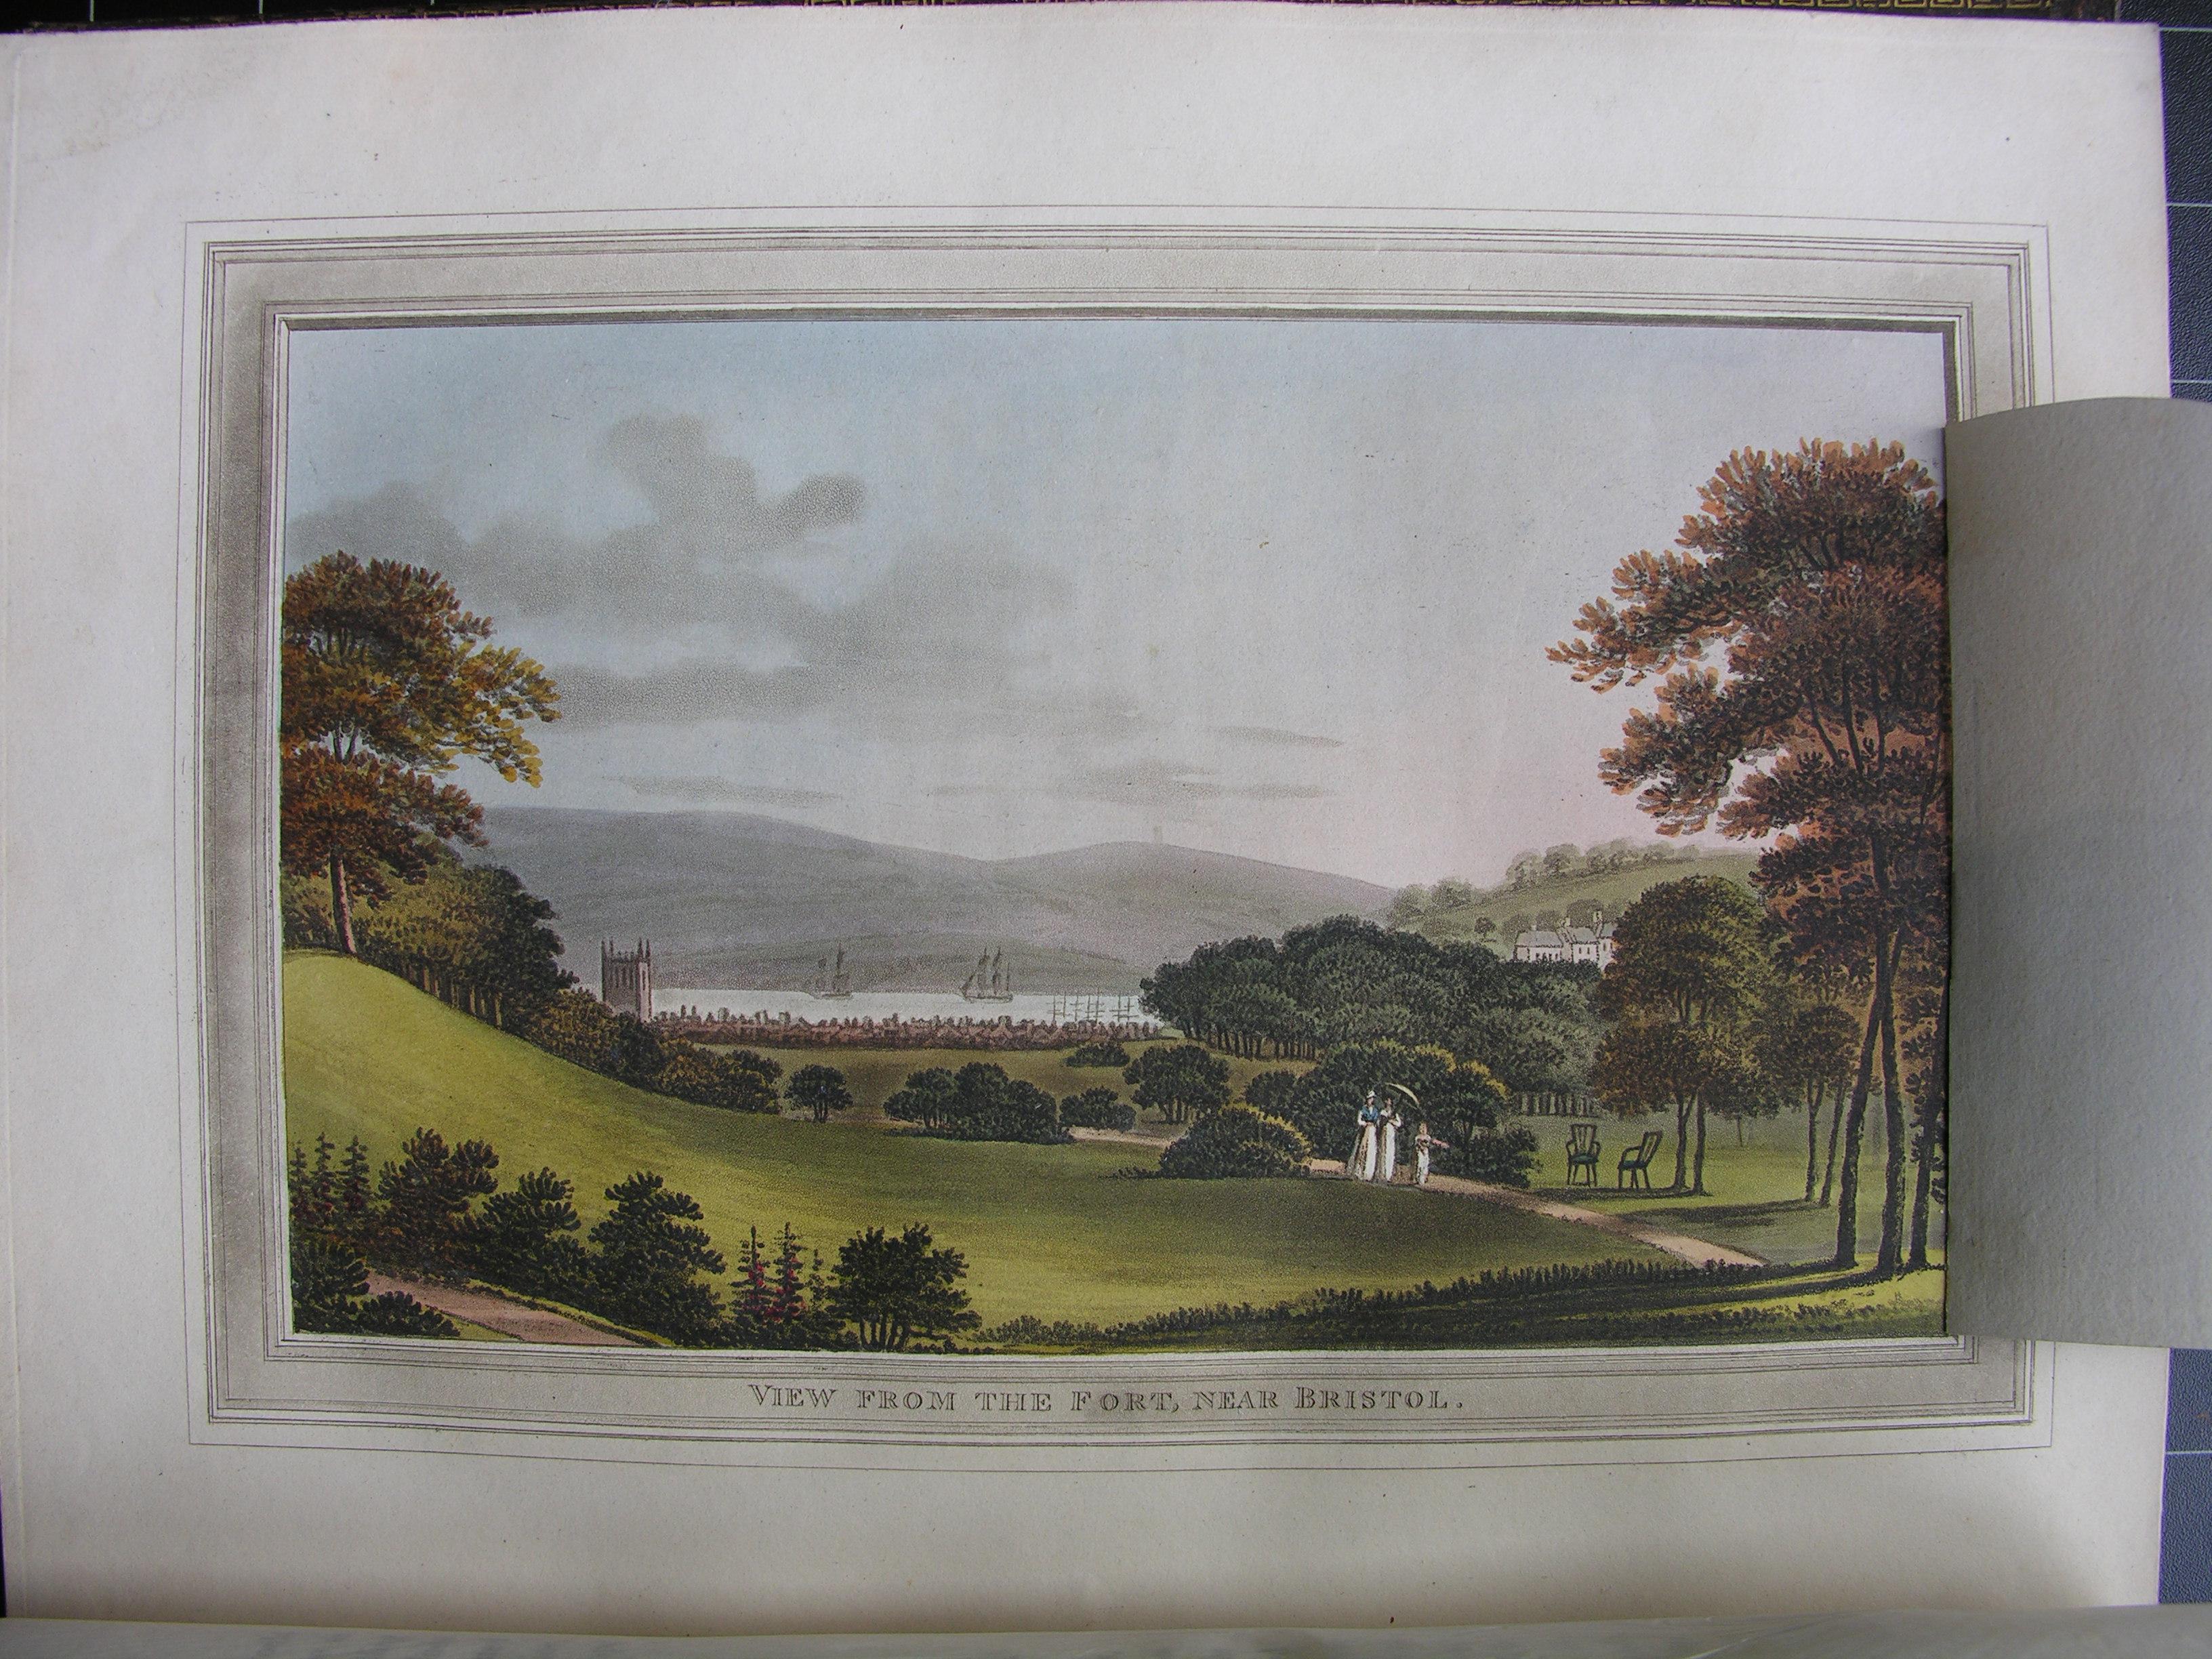 An illustration of the same landscape, but the houses are obscured by trees.